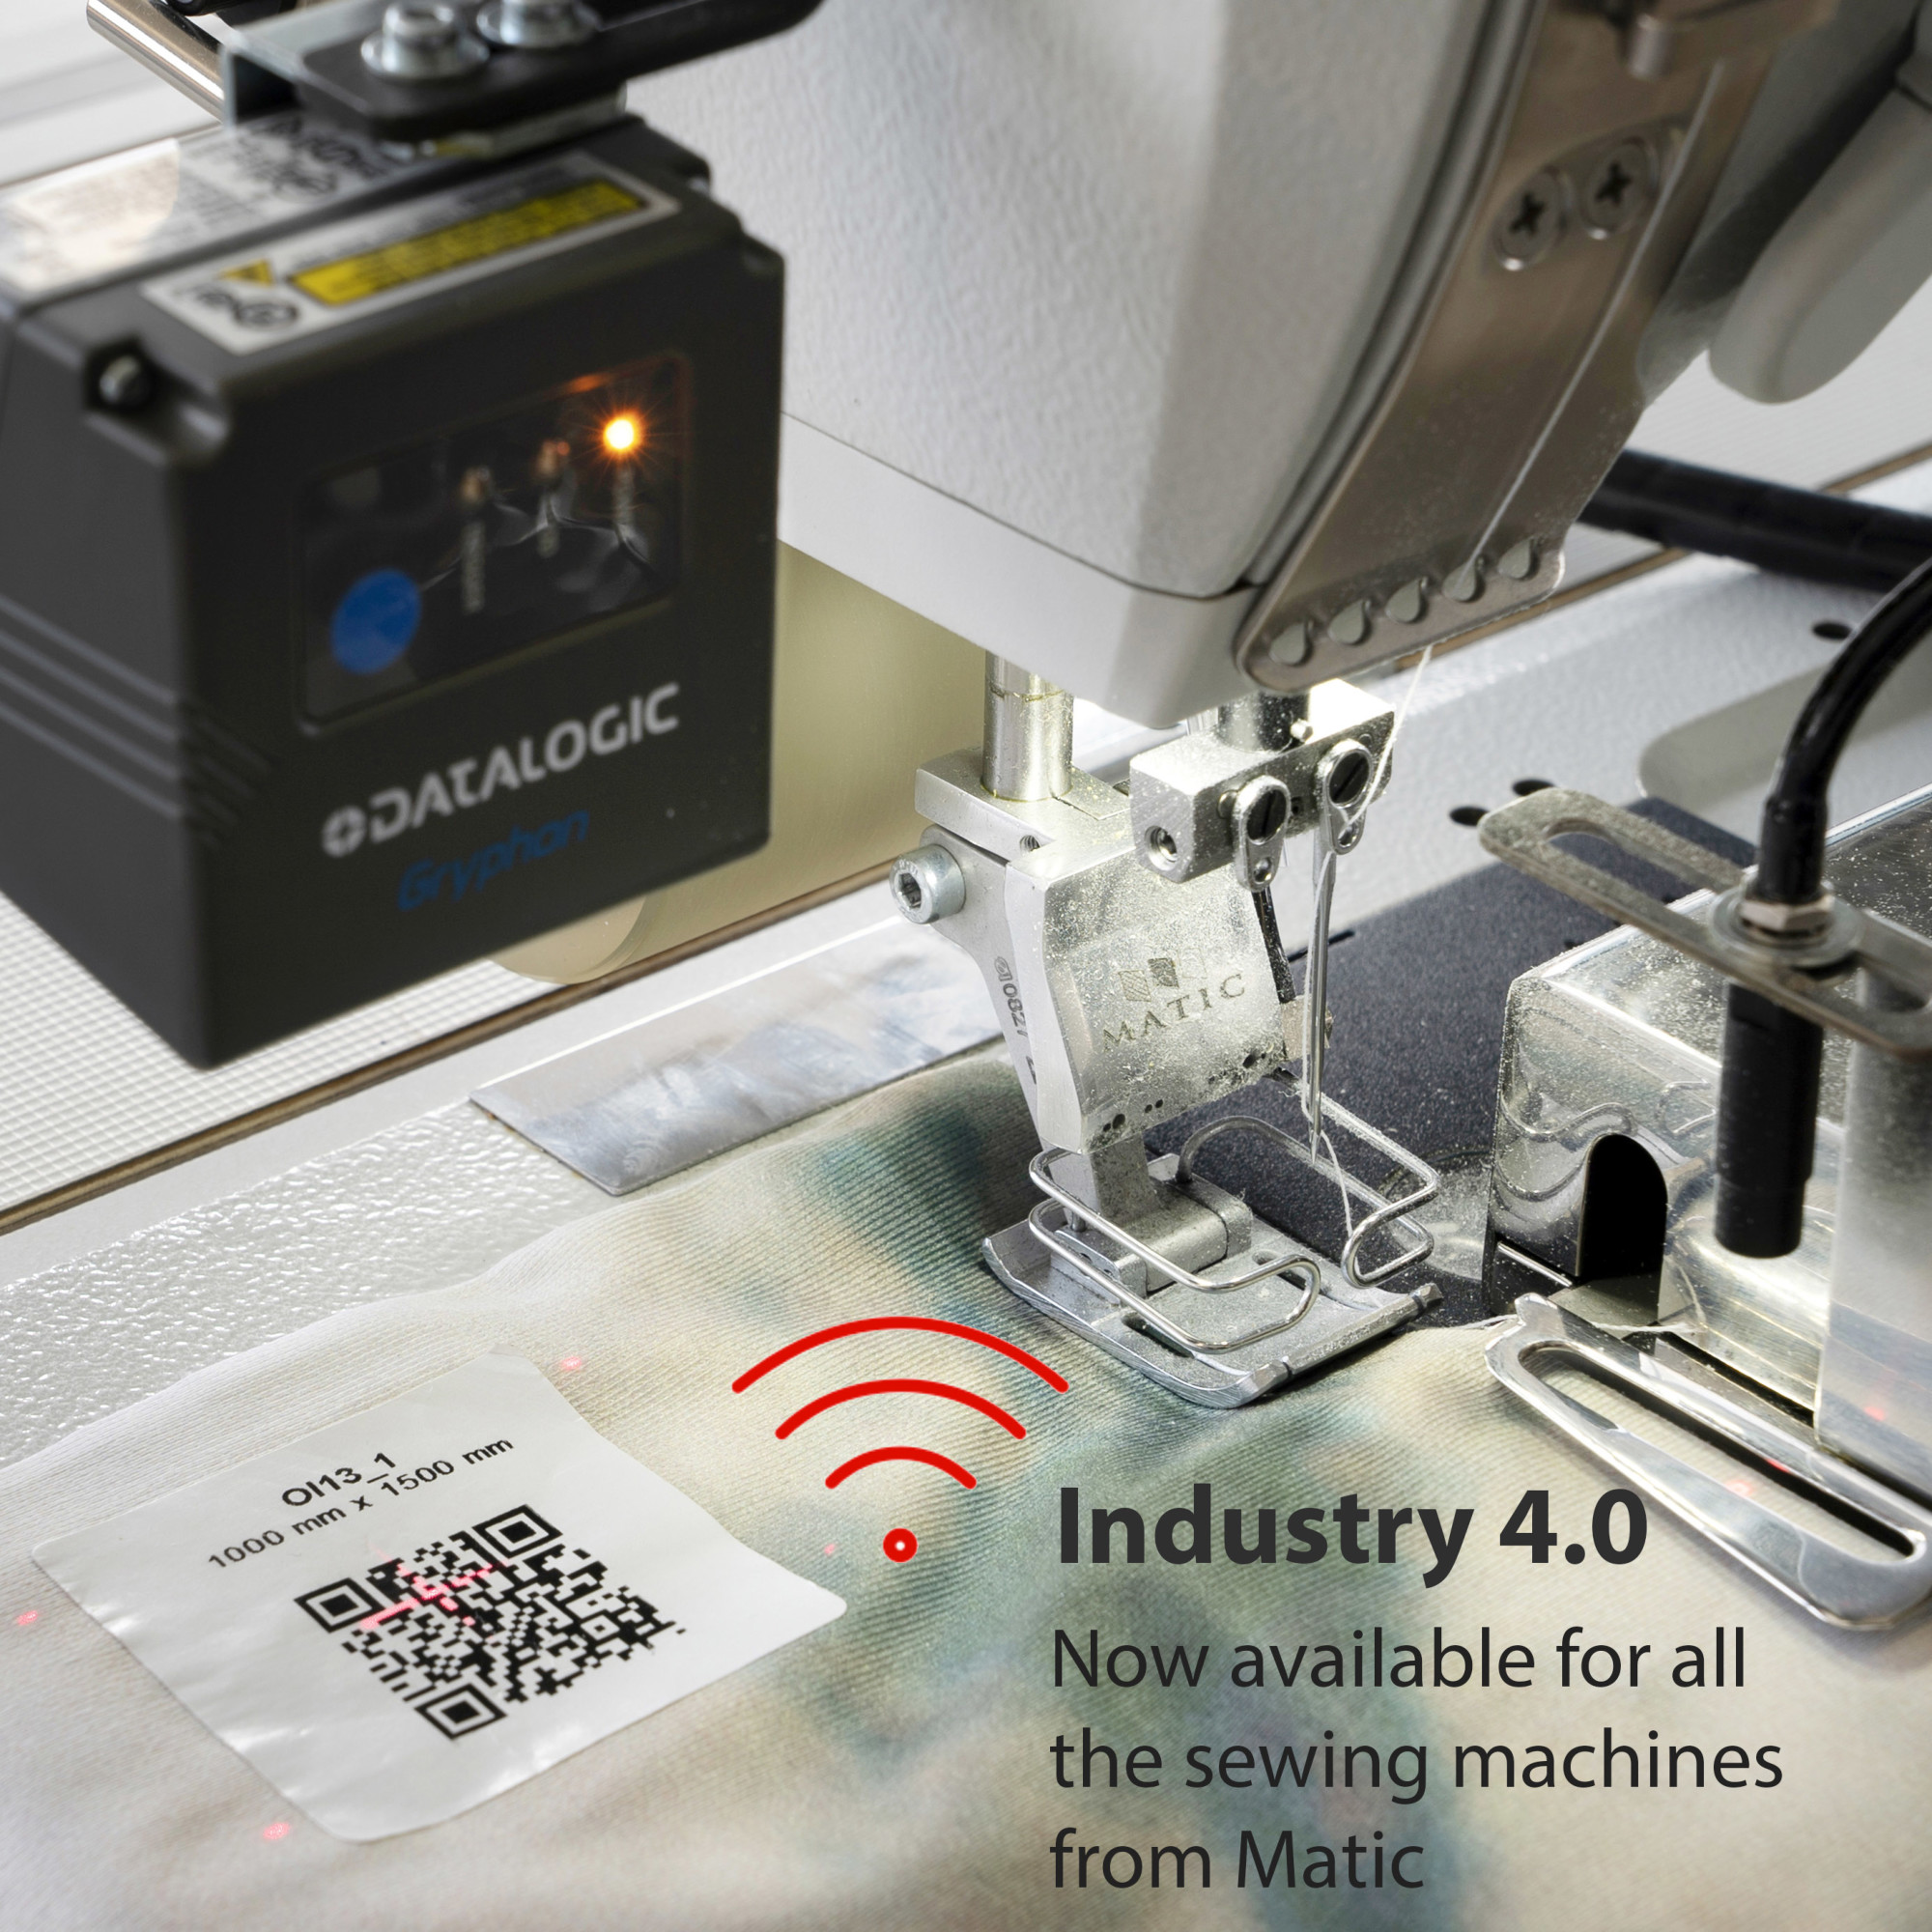 The Industry 4.0 option is now available on all Matic Sewing Machines. 